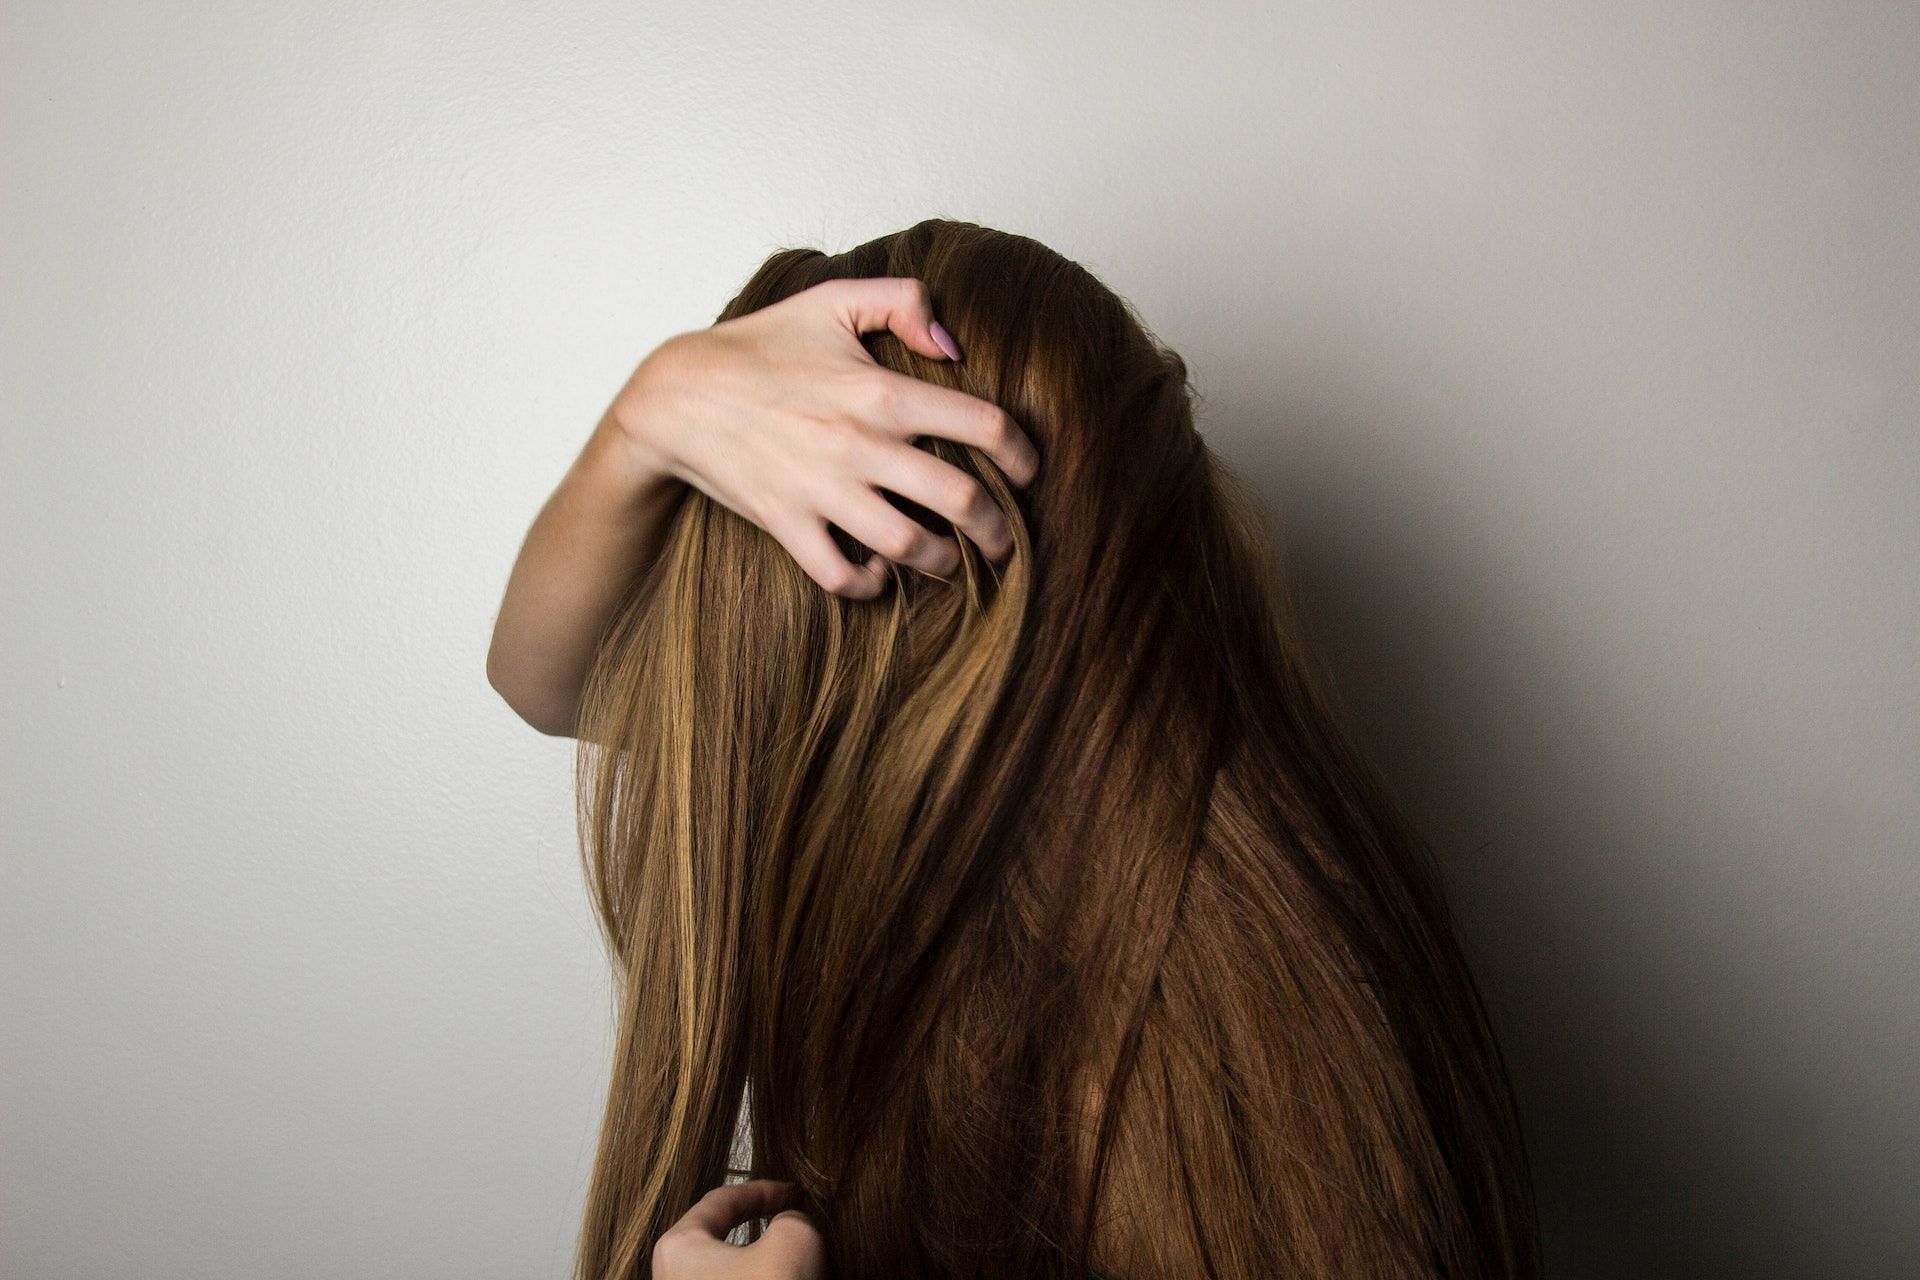 Dry scalp causes itching and flaking. (Photo via Pexels/Bennie Lukas Bester)